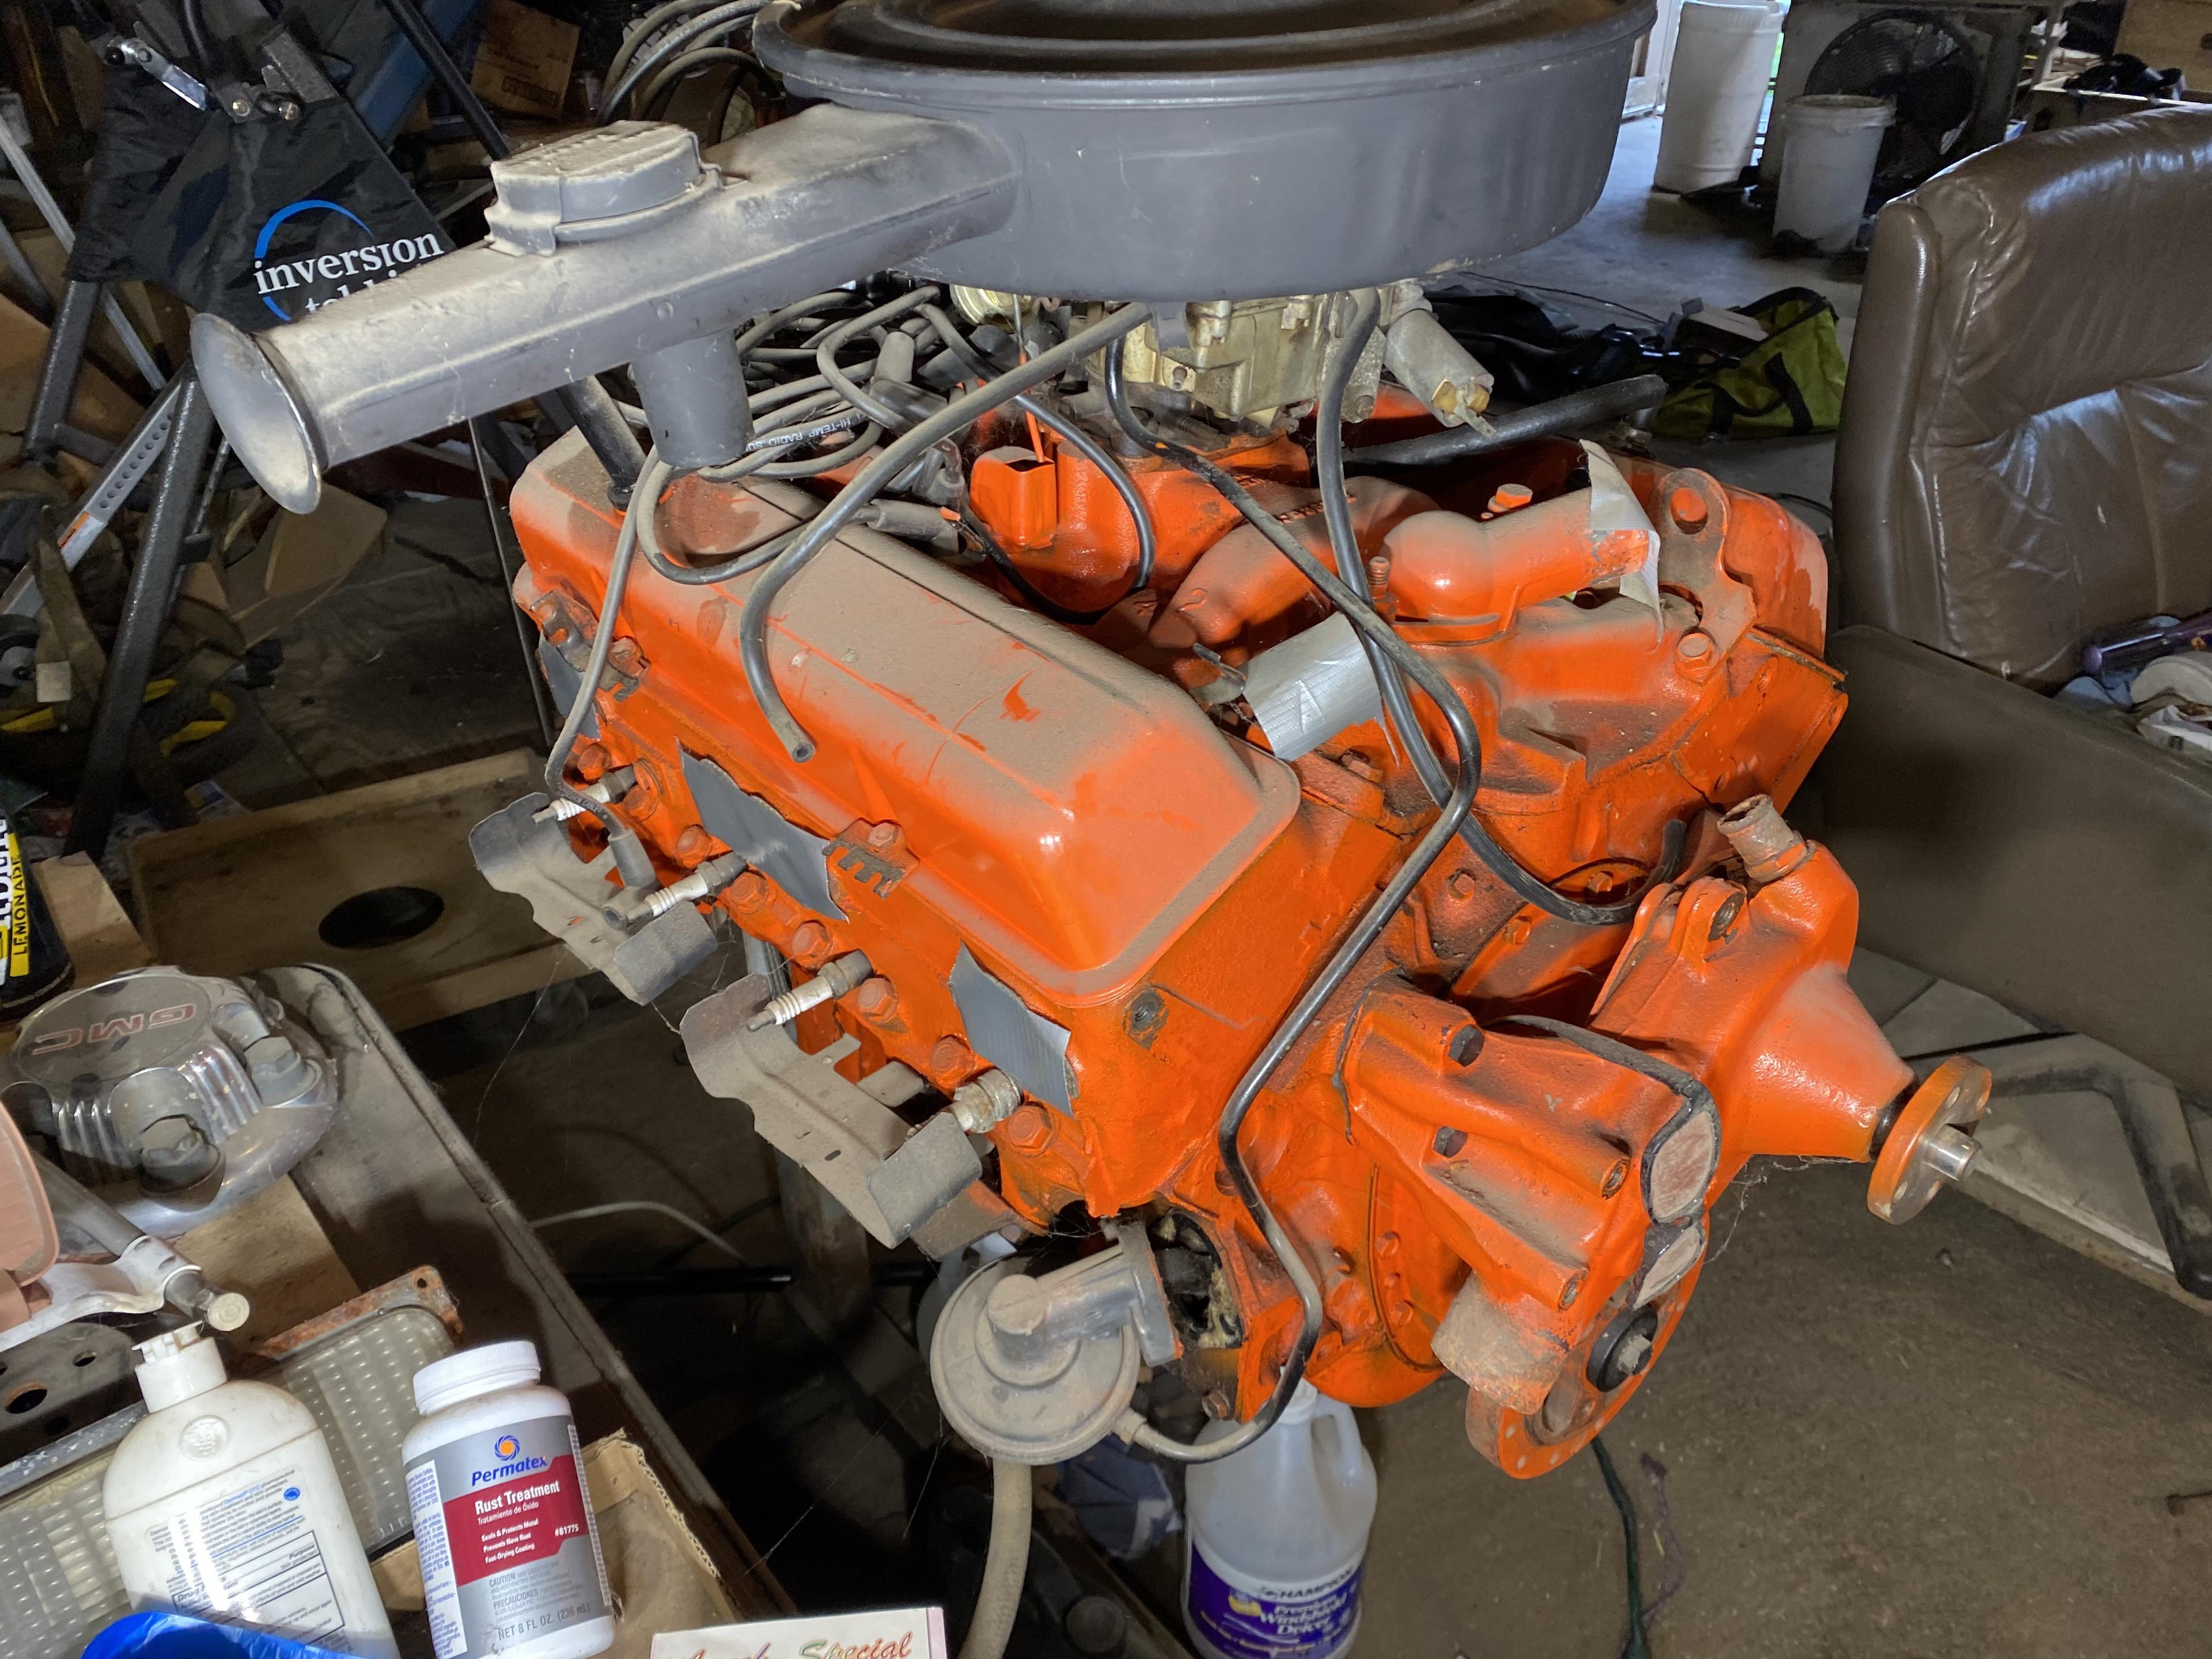 8-Cylinder Chevy Motor on Engine Stand